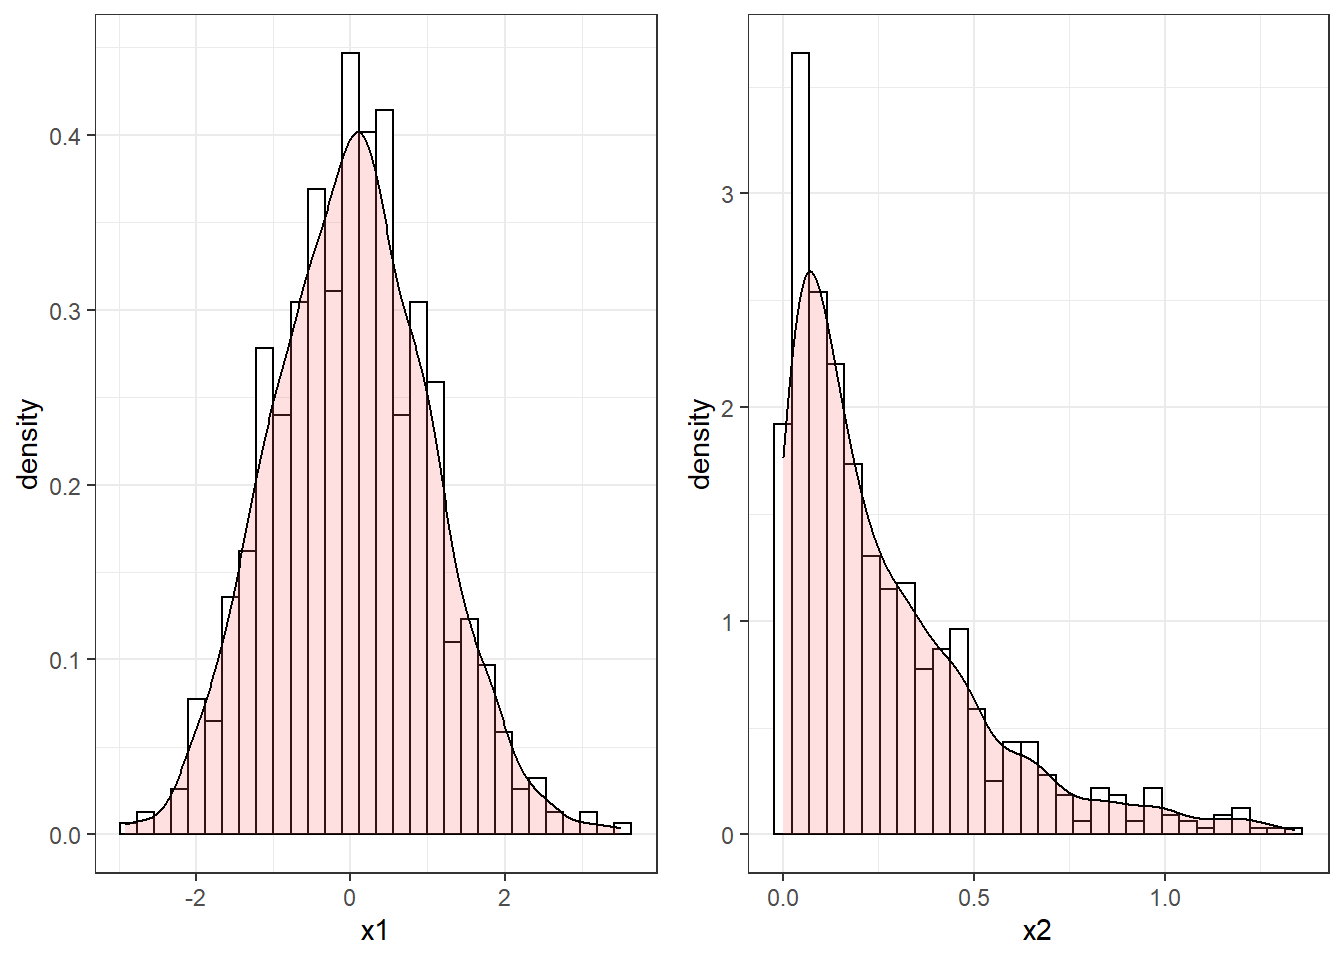 Histograms of two sequences of randomly generated numbers